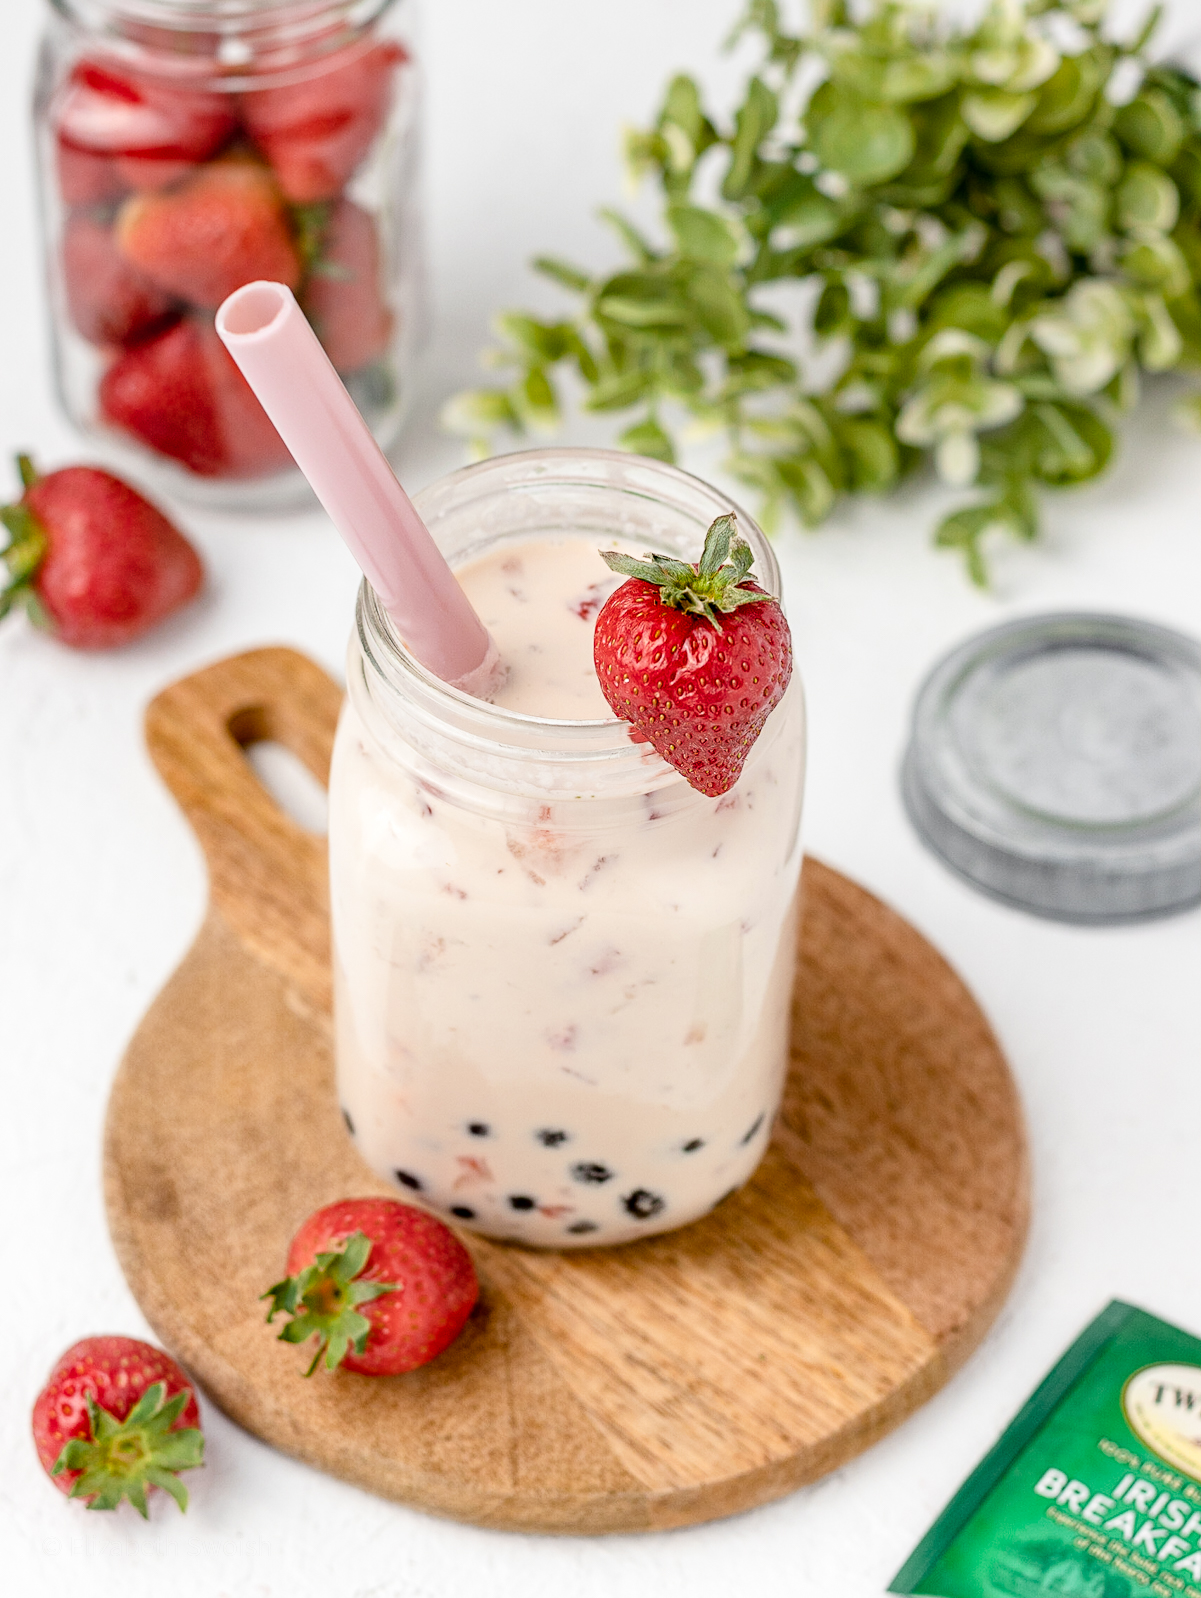 Strawberry Milk Tea with boba and fresh strawberries. Surrounded by more fresh strawberries.